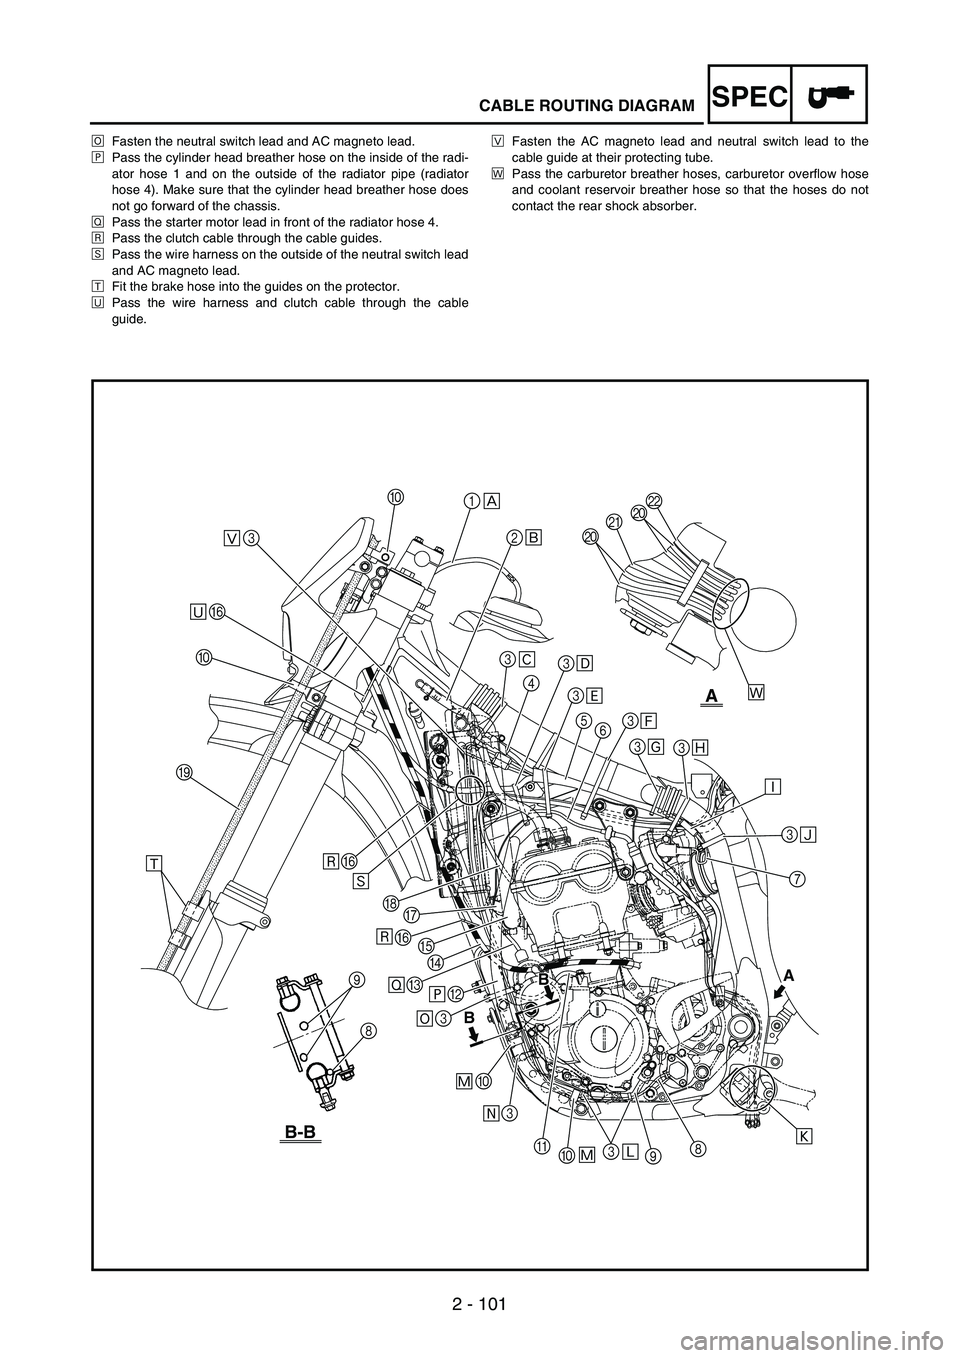 YAMAHA WR 250F 2004  Manuale de Empleo (in Spanish) SPEC
2 - 101
CABLE ROUTING DIAGRAM
ÖFasten the neutral switch lead and AC magneto lead.
×Pass the cylinder head breather hose on the inside of the radi-
ator hose 1 and on the outside of the radiato